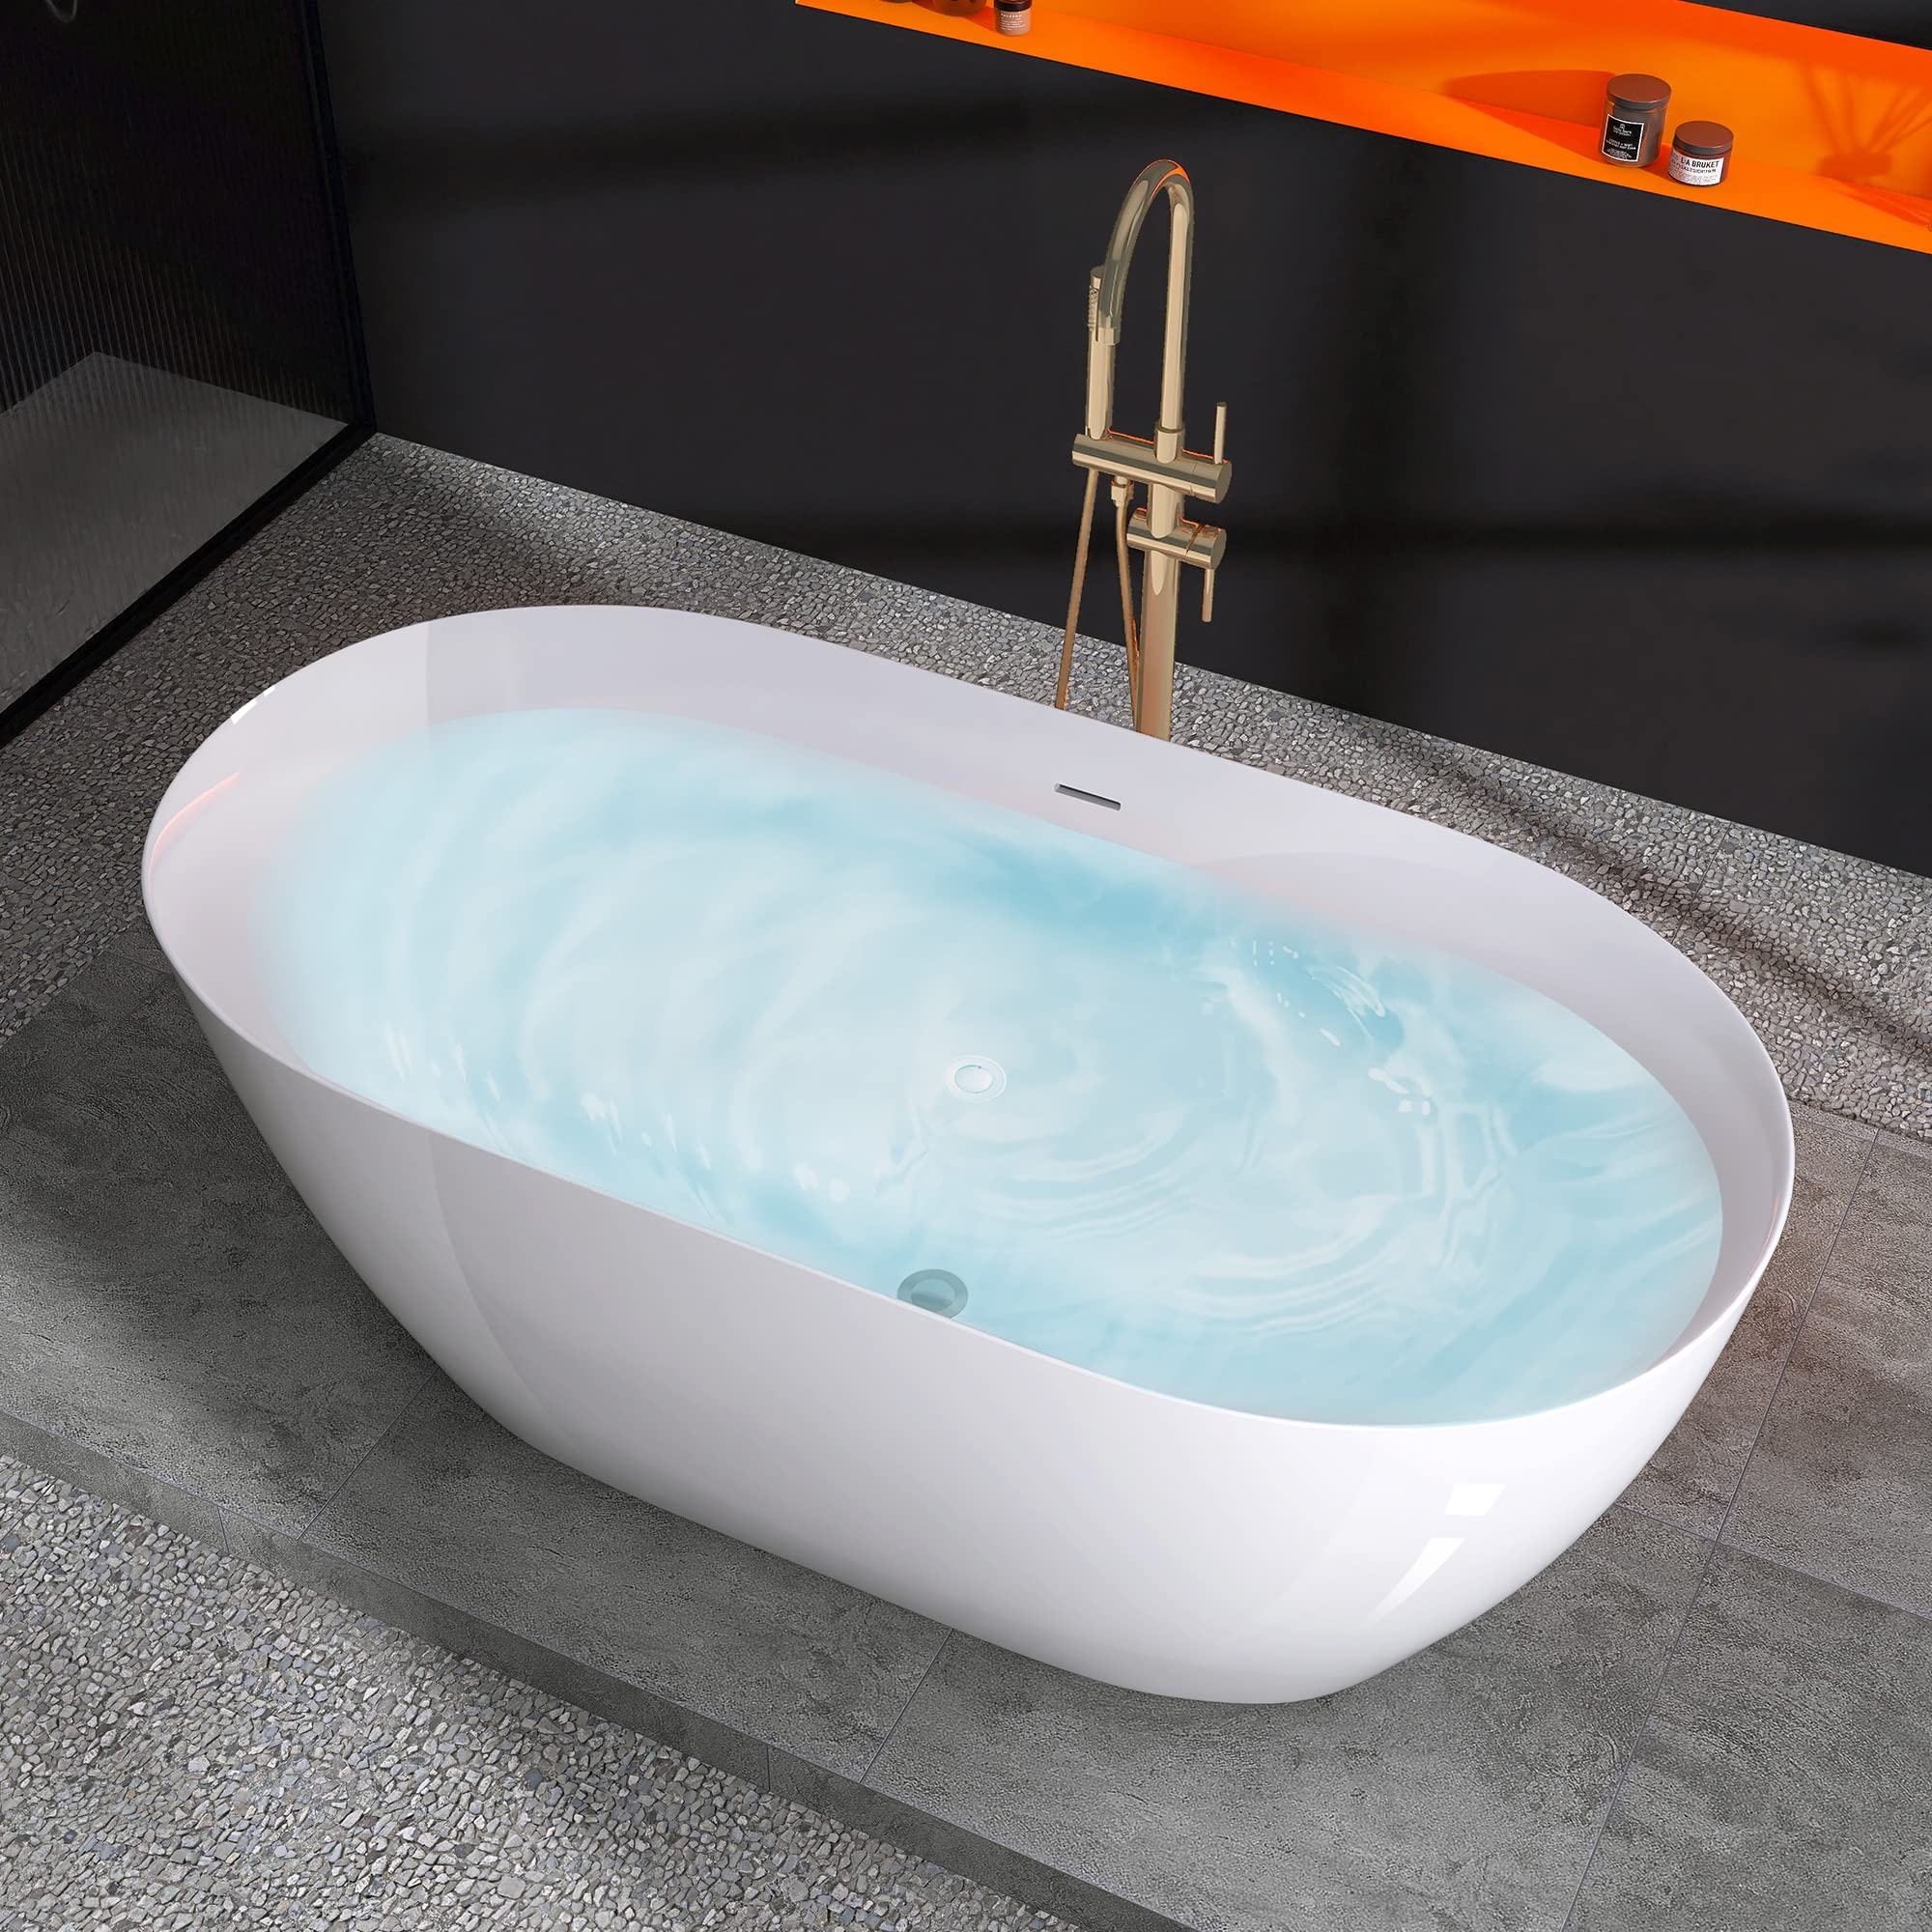 ZUAGCO Free Standing Tub 59" Curve Shape Acrylic Freestanding Bathtub Adjustable Modern Soaking Tub with Integrated Slotted Overflow and Removable Pop-up Drain Anti-clogging Glossy White 59"x30"